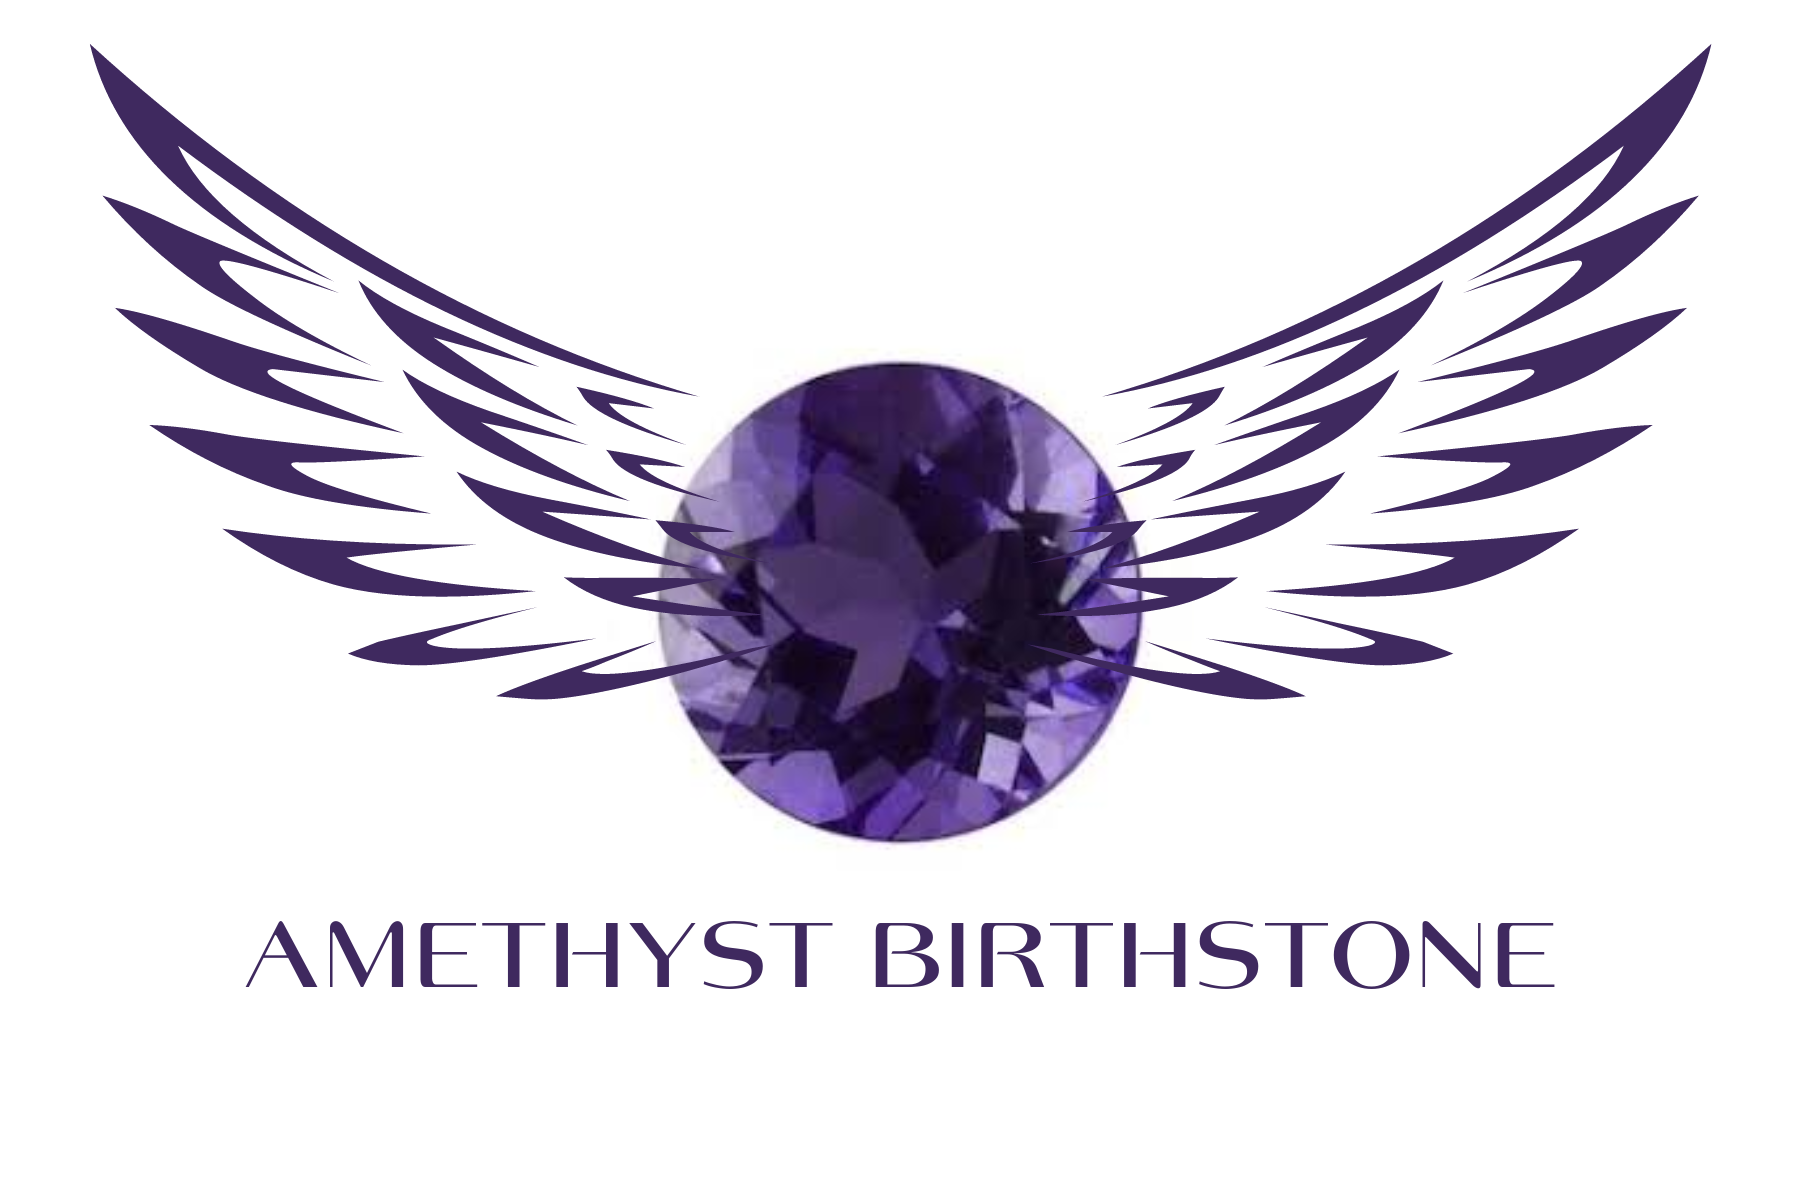 A round purple amethyst with deep purple wings